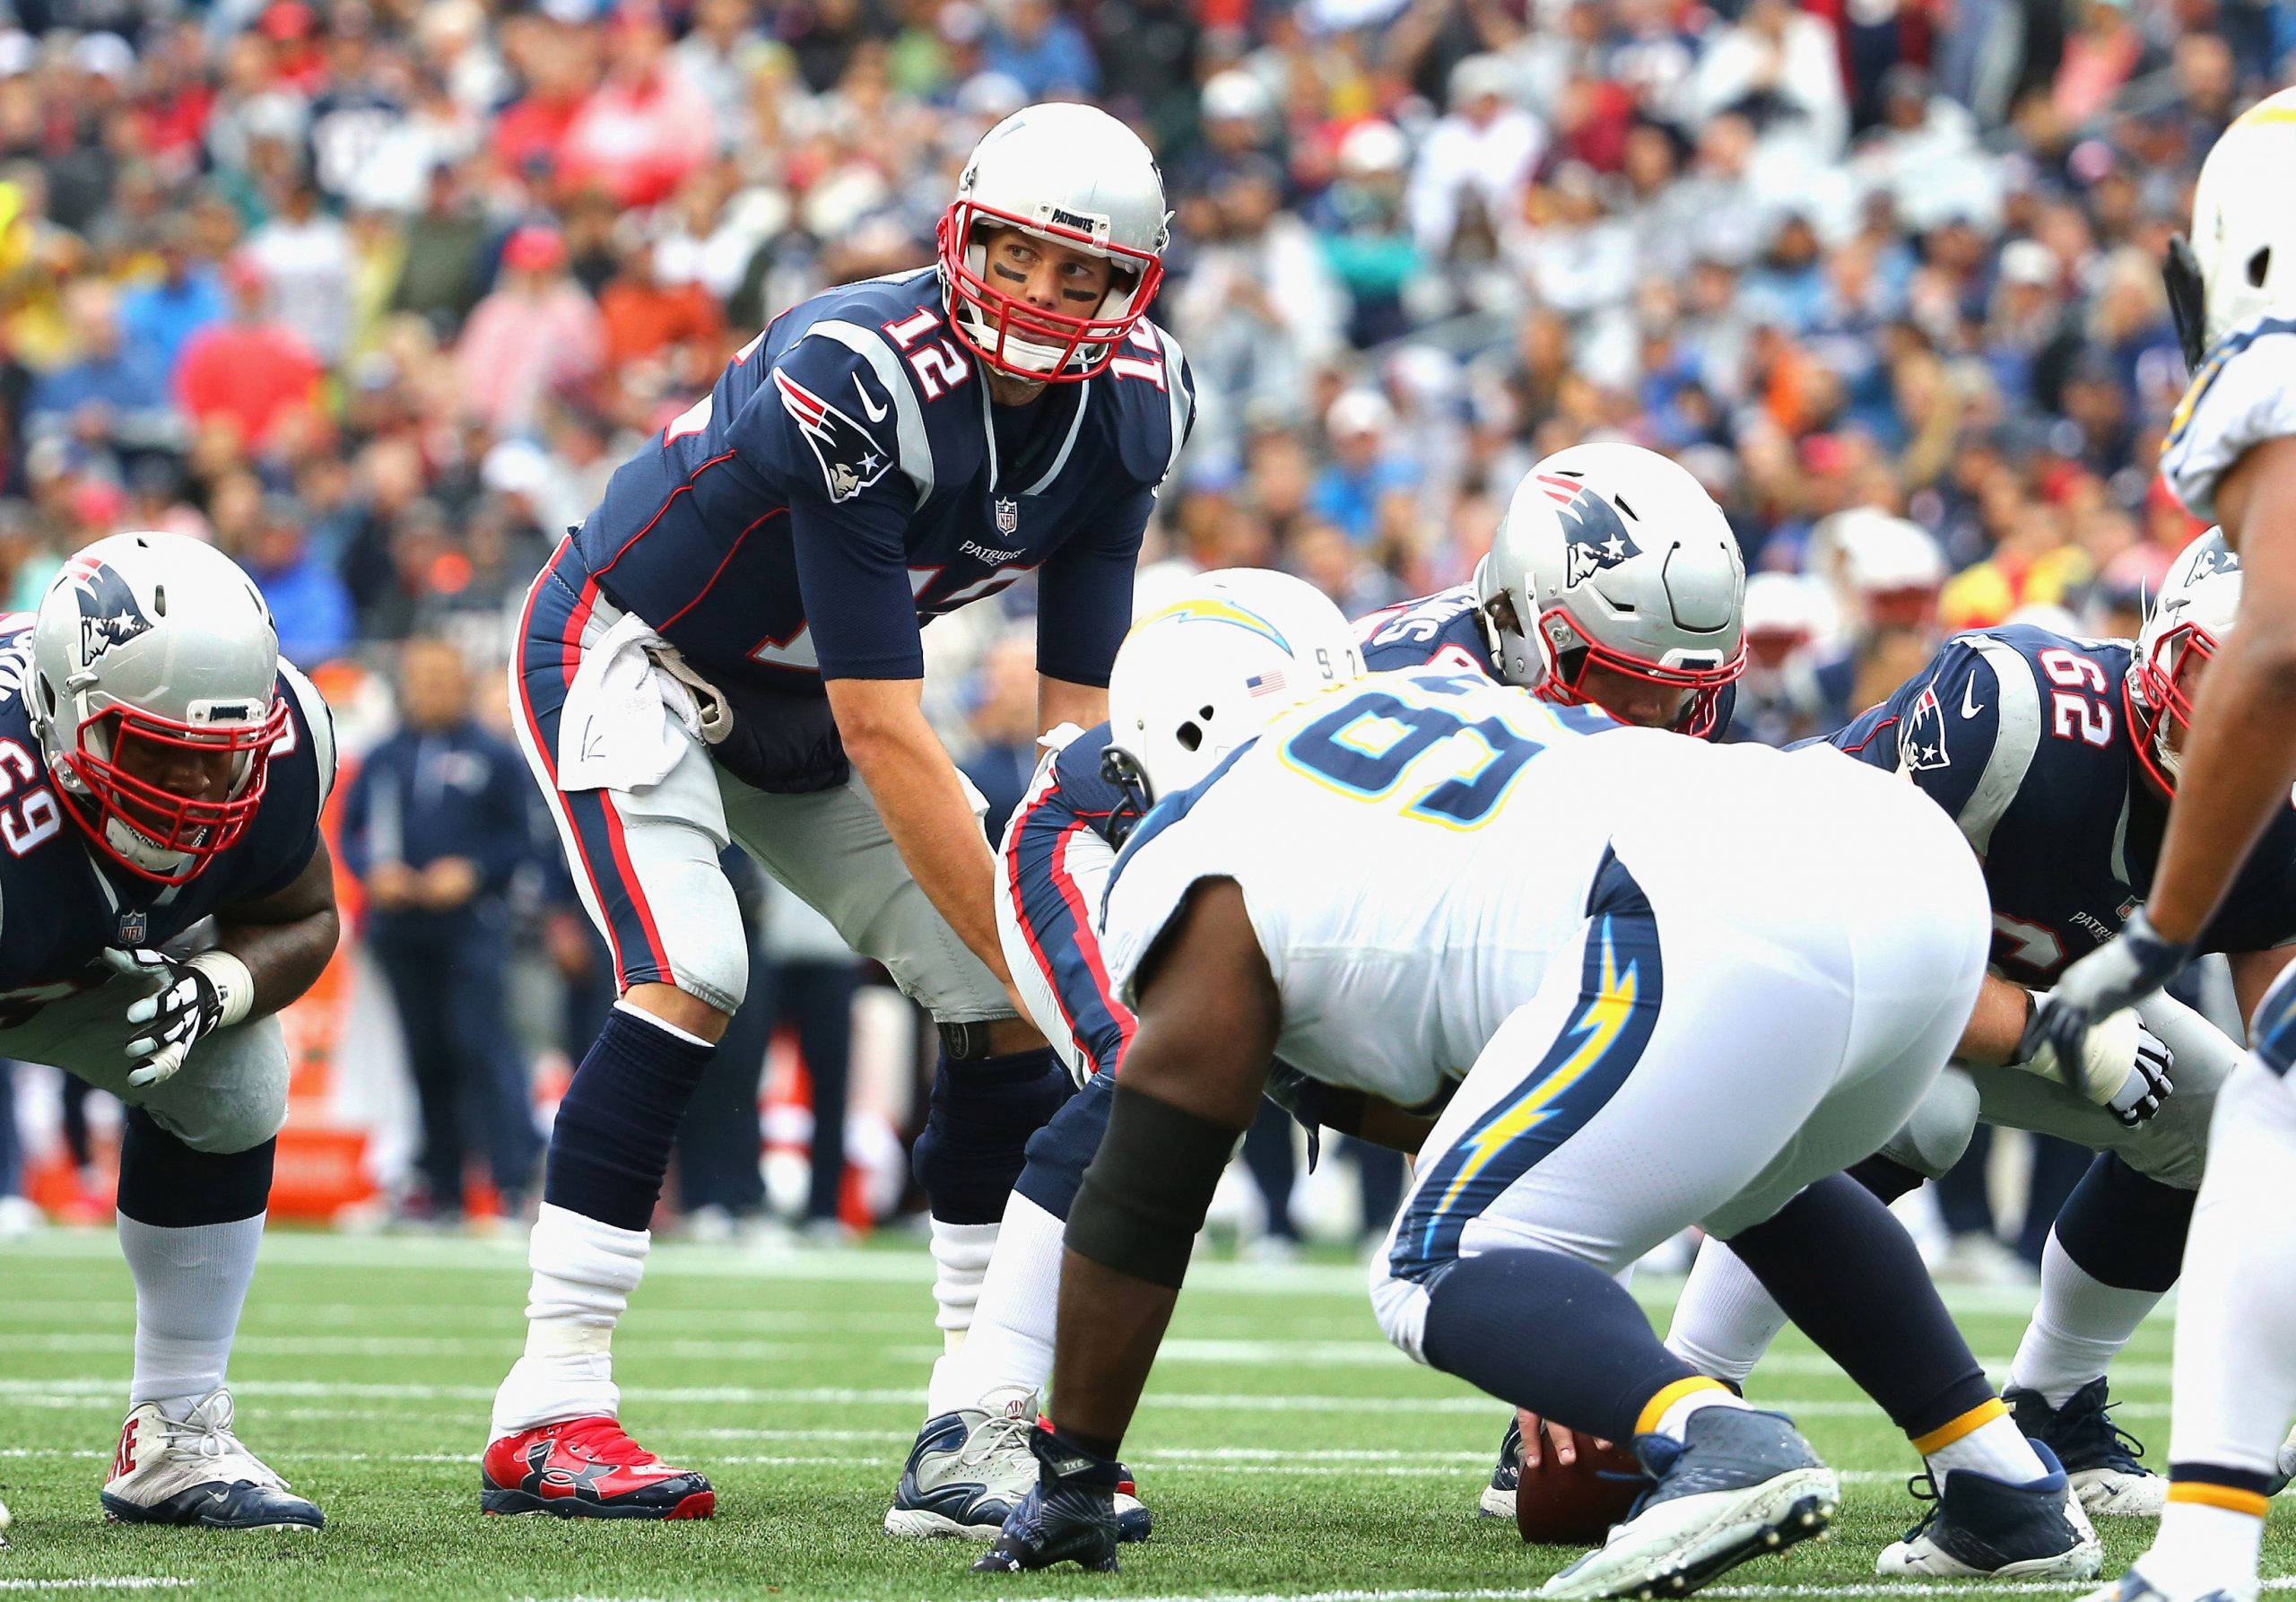 WATCH: PATRIOTS VS. CHARGERS NFL PLAYOFFS FREE LIVE STREAM